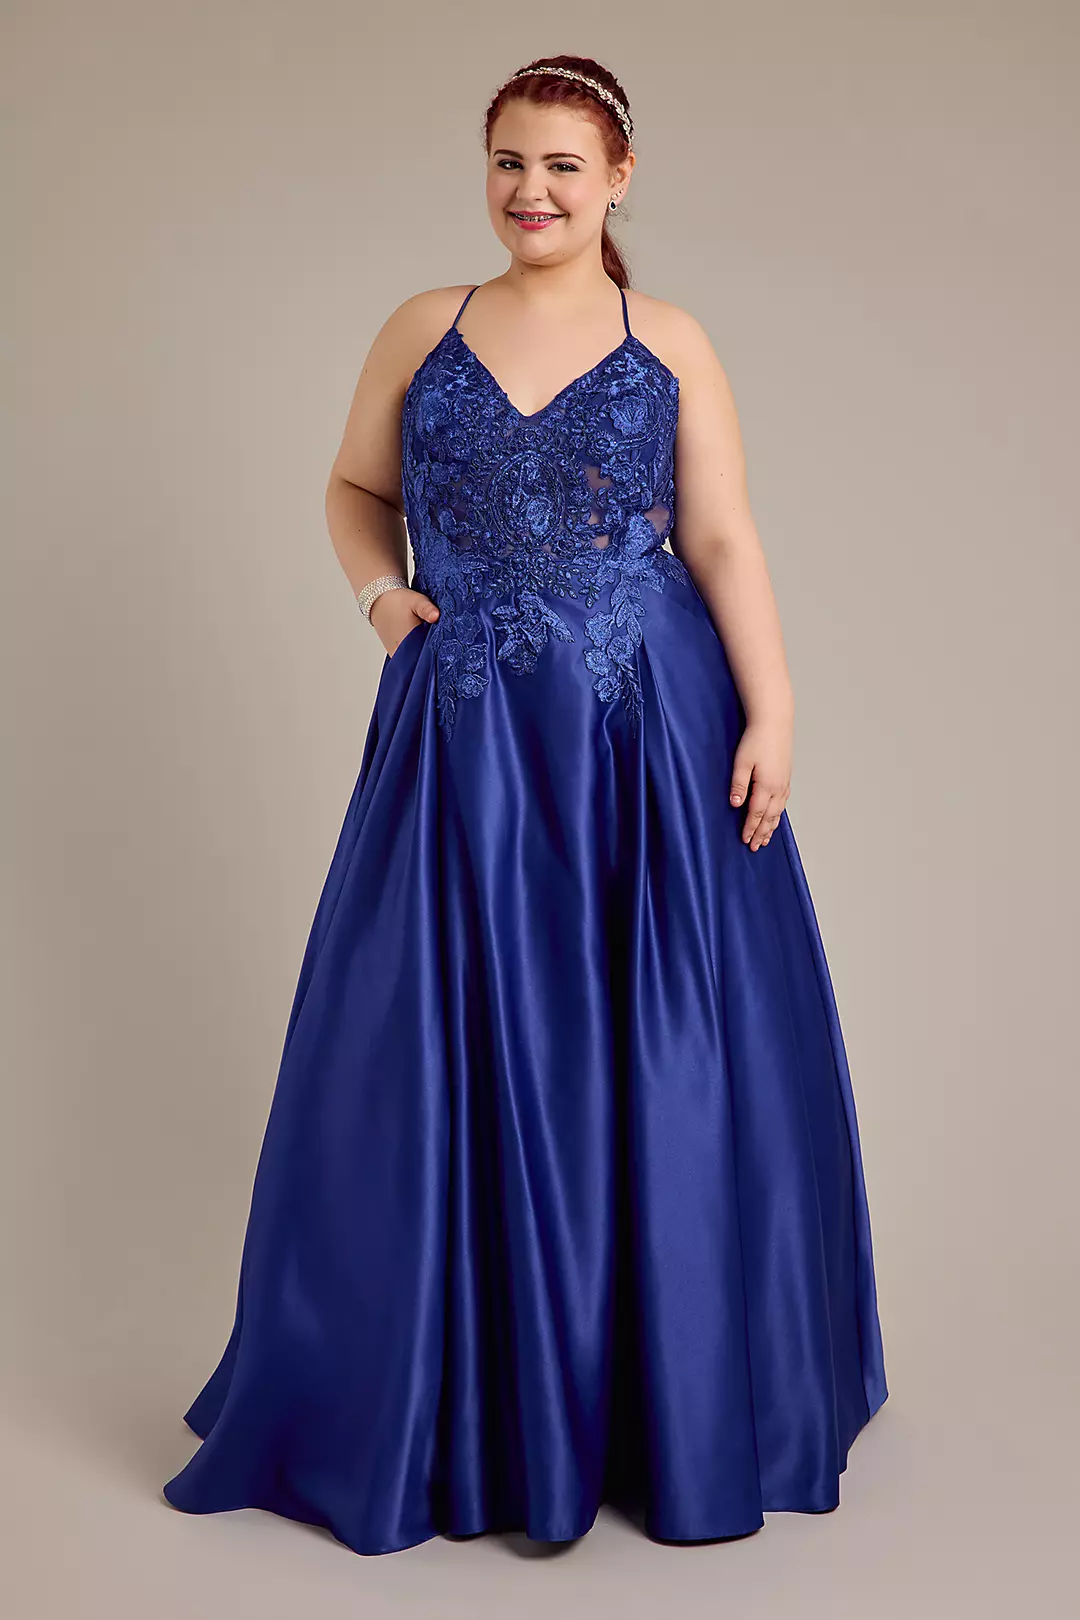 Satin Ball Gown with Illusion Applique Bodice Image